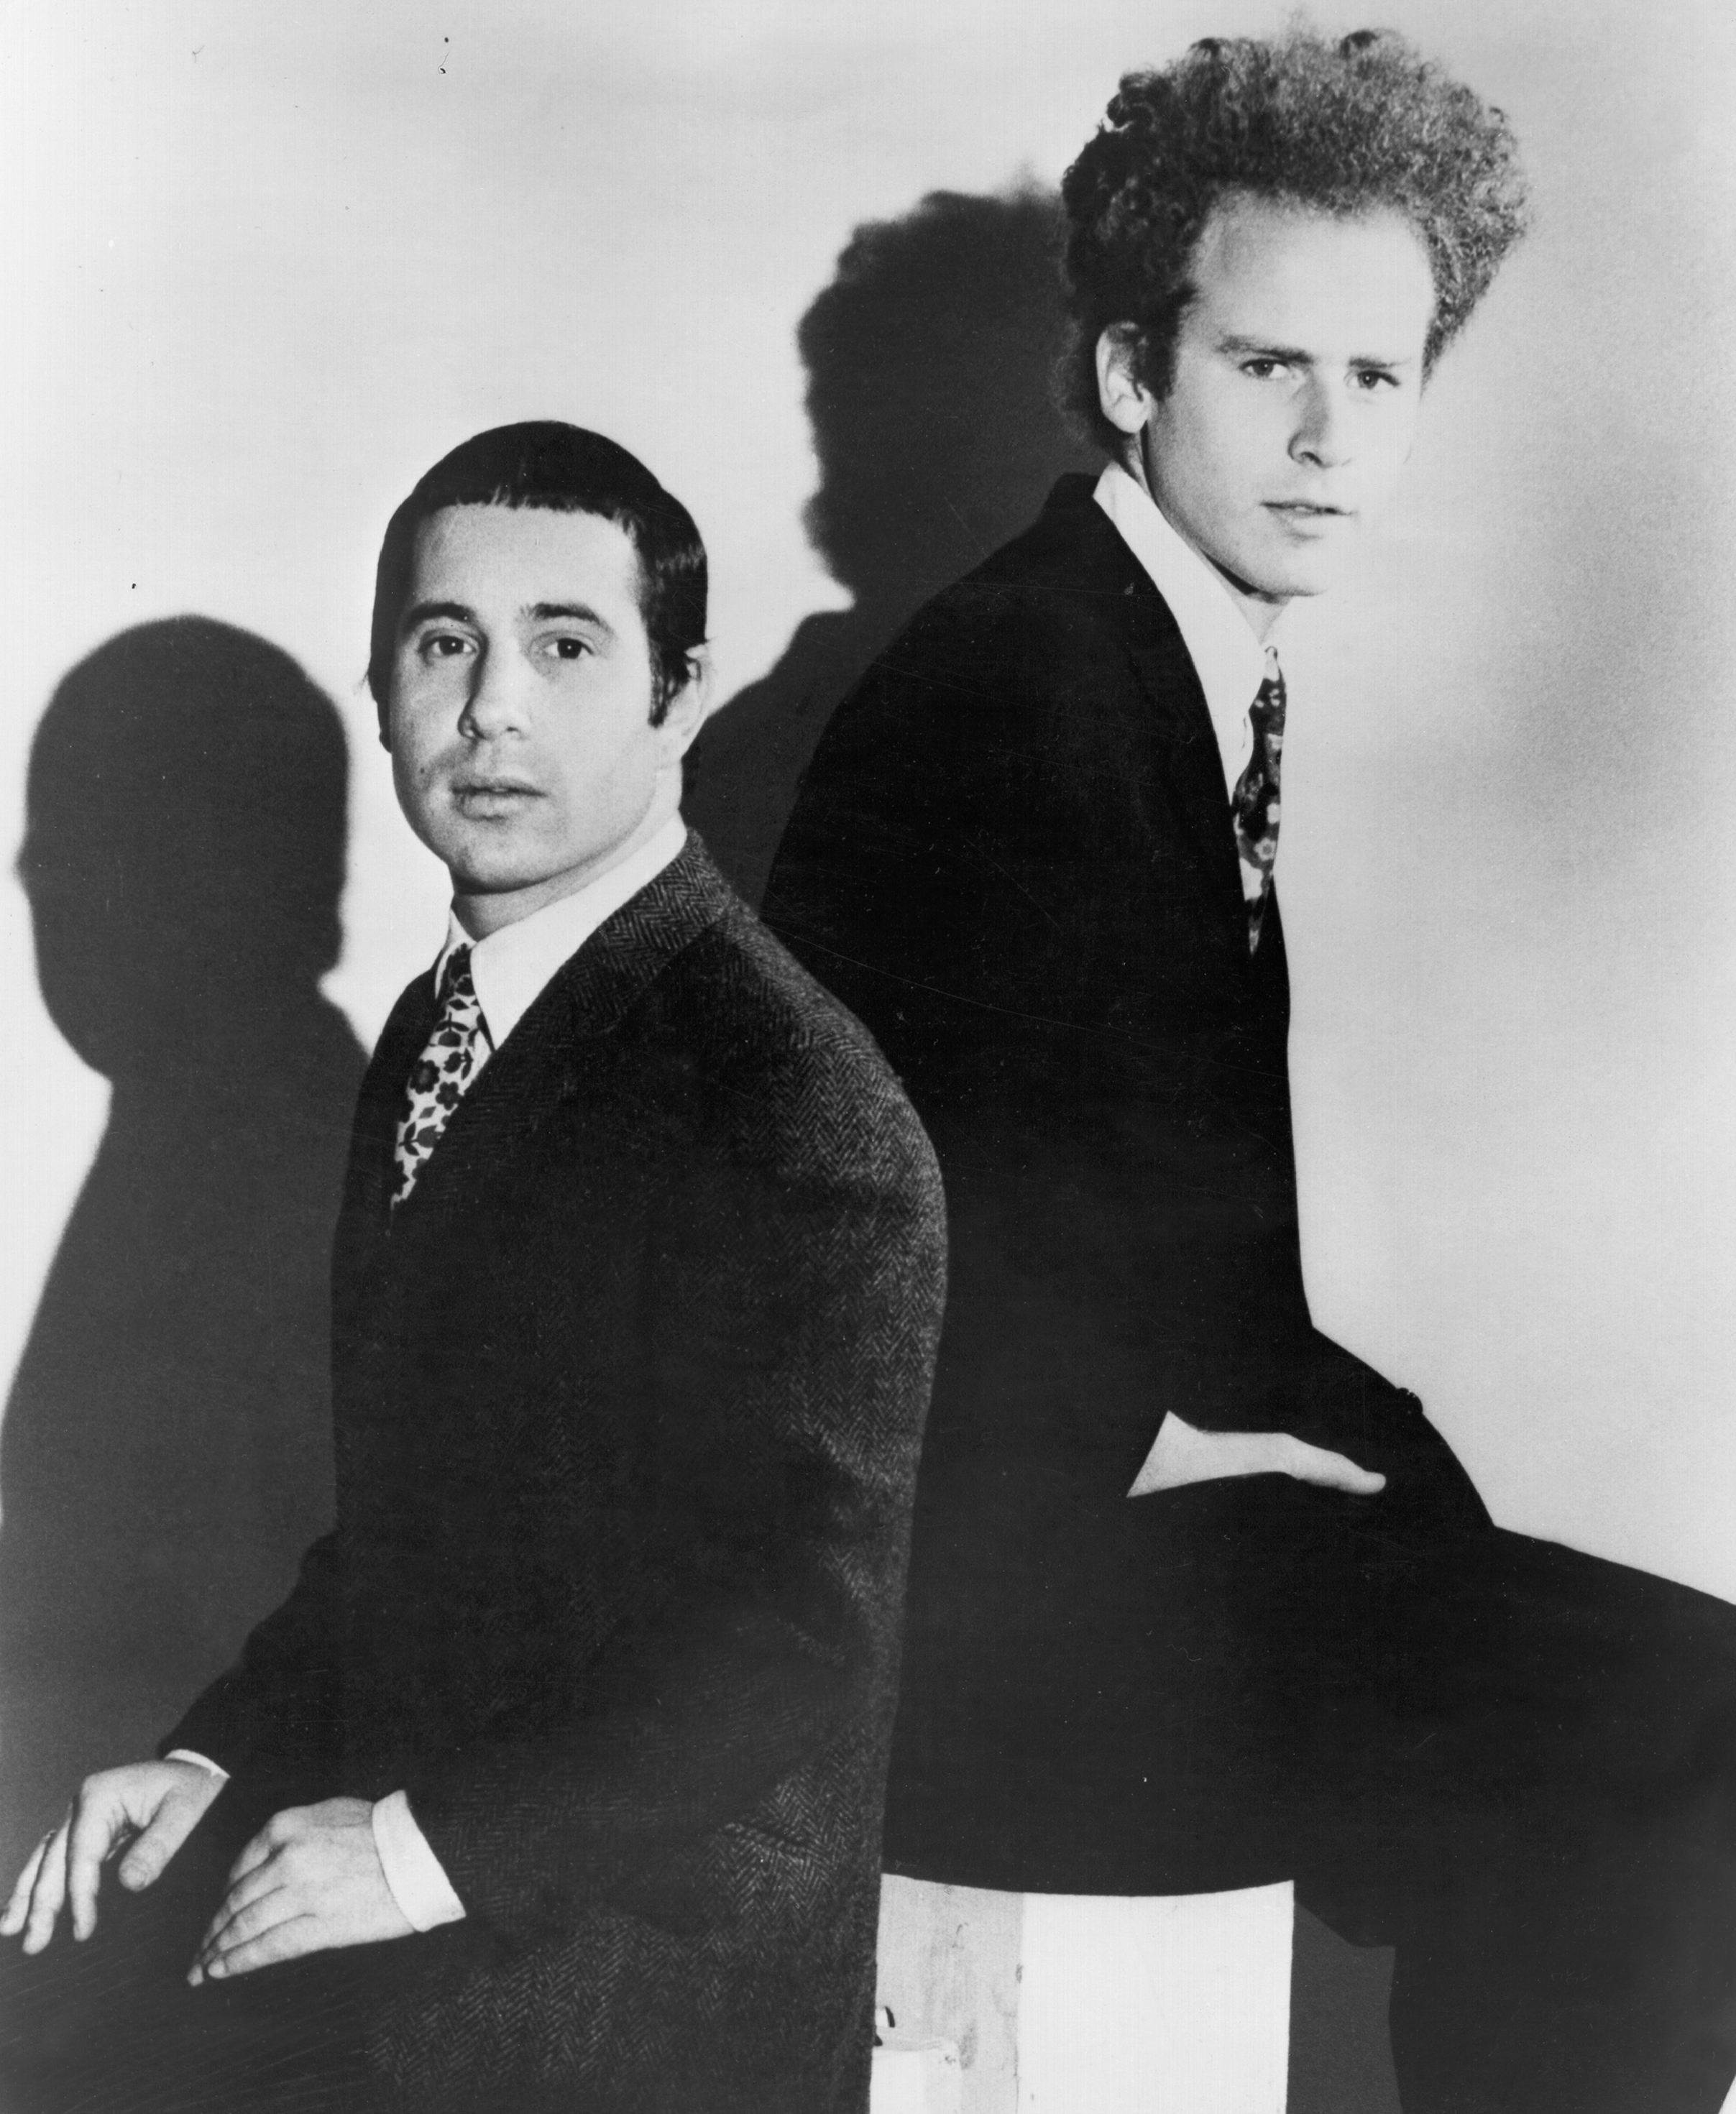 Paul Simon and Art Garfunkel of the folk rock duo Simon & Garfunkel in a Columbia Records publicity still in New York, circa 1967. | Source: Getty Images